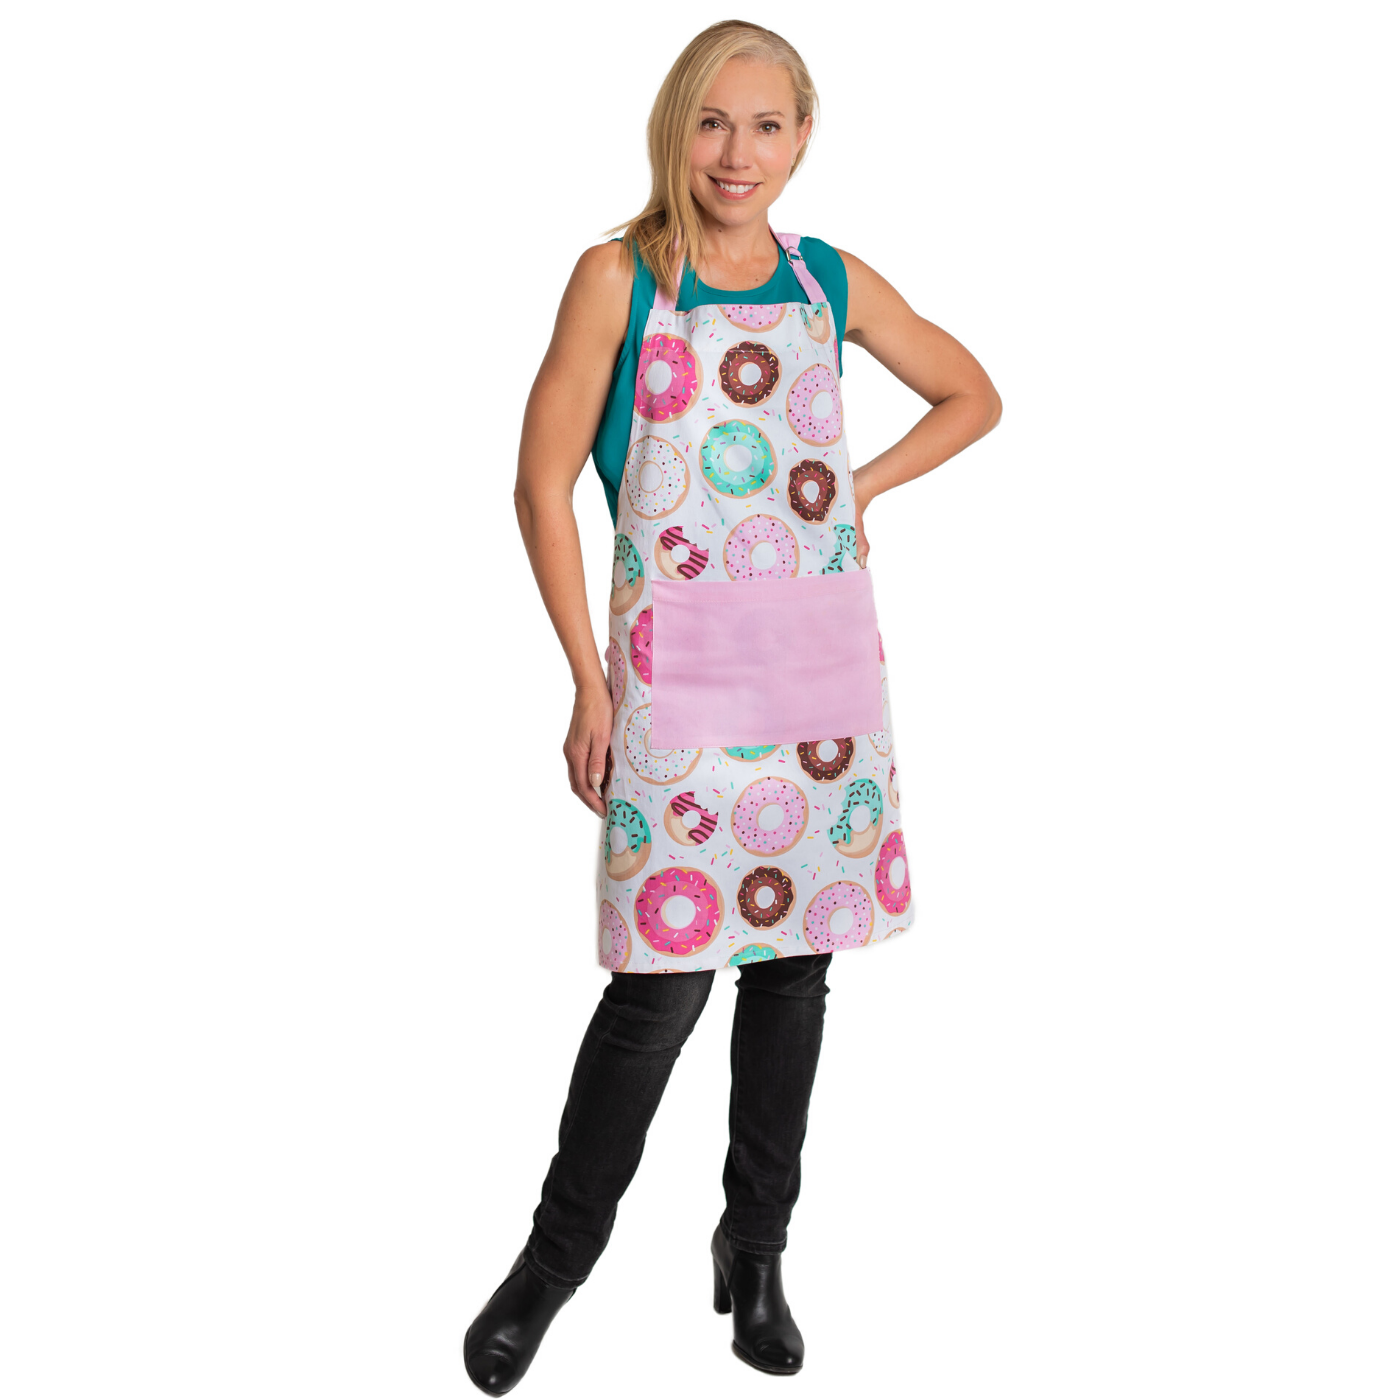 Adult wearing Adult sized apron from Parent and Child Matching Aprons Donut set